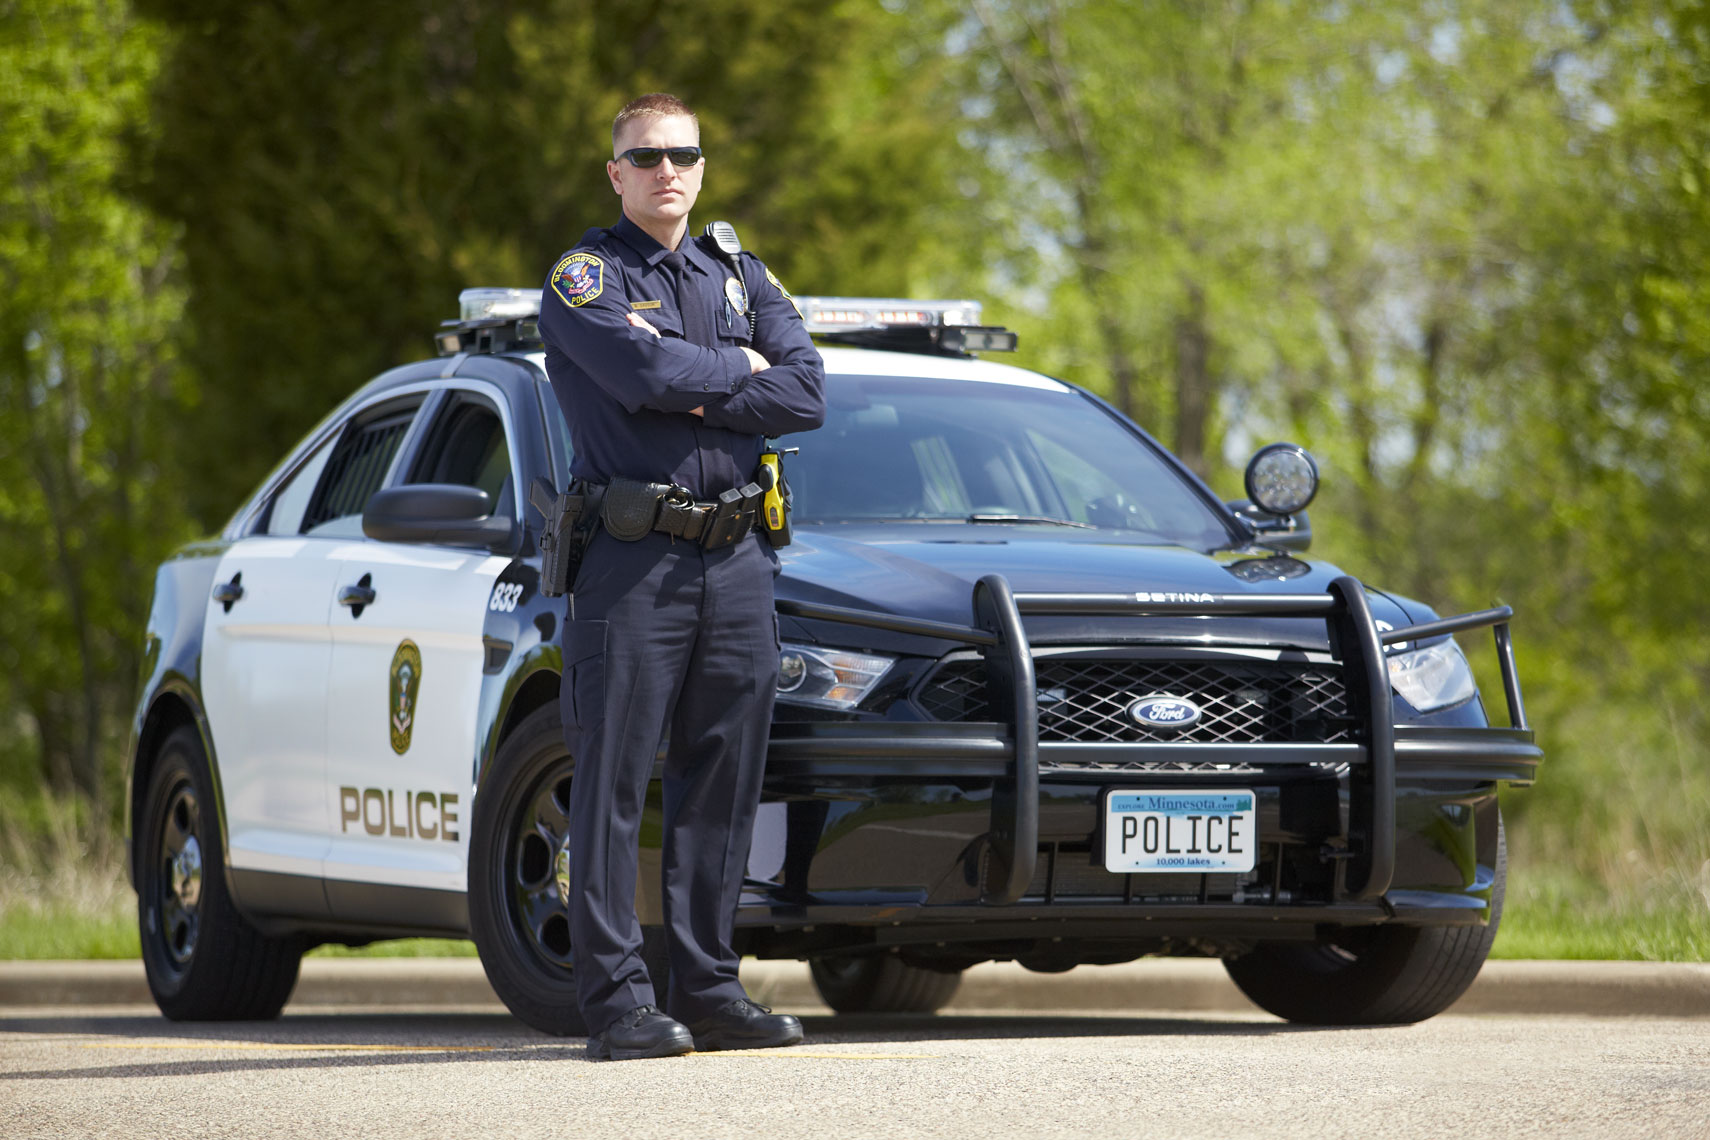 Confident cop/standing/front of cop car/trees/lifestyle photography